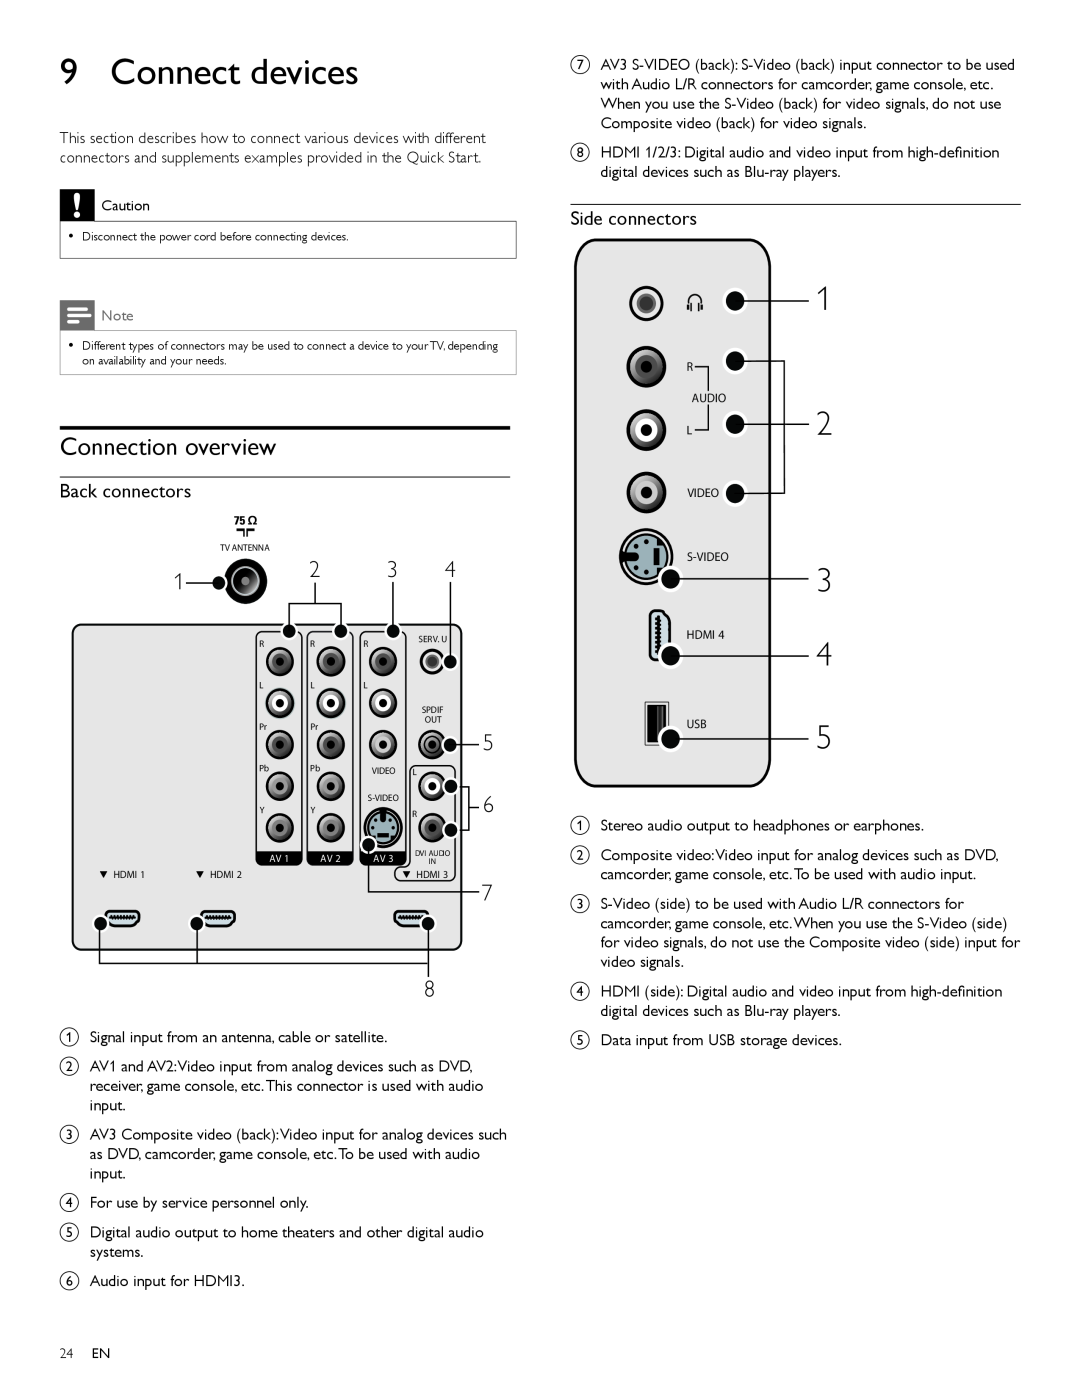 Magnavox 47MF439B user manual Connect devices, Connection overview, Back connectors, Side connectors 